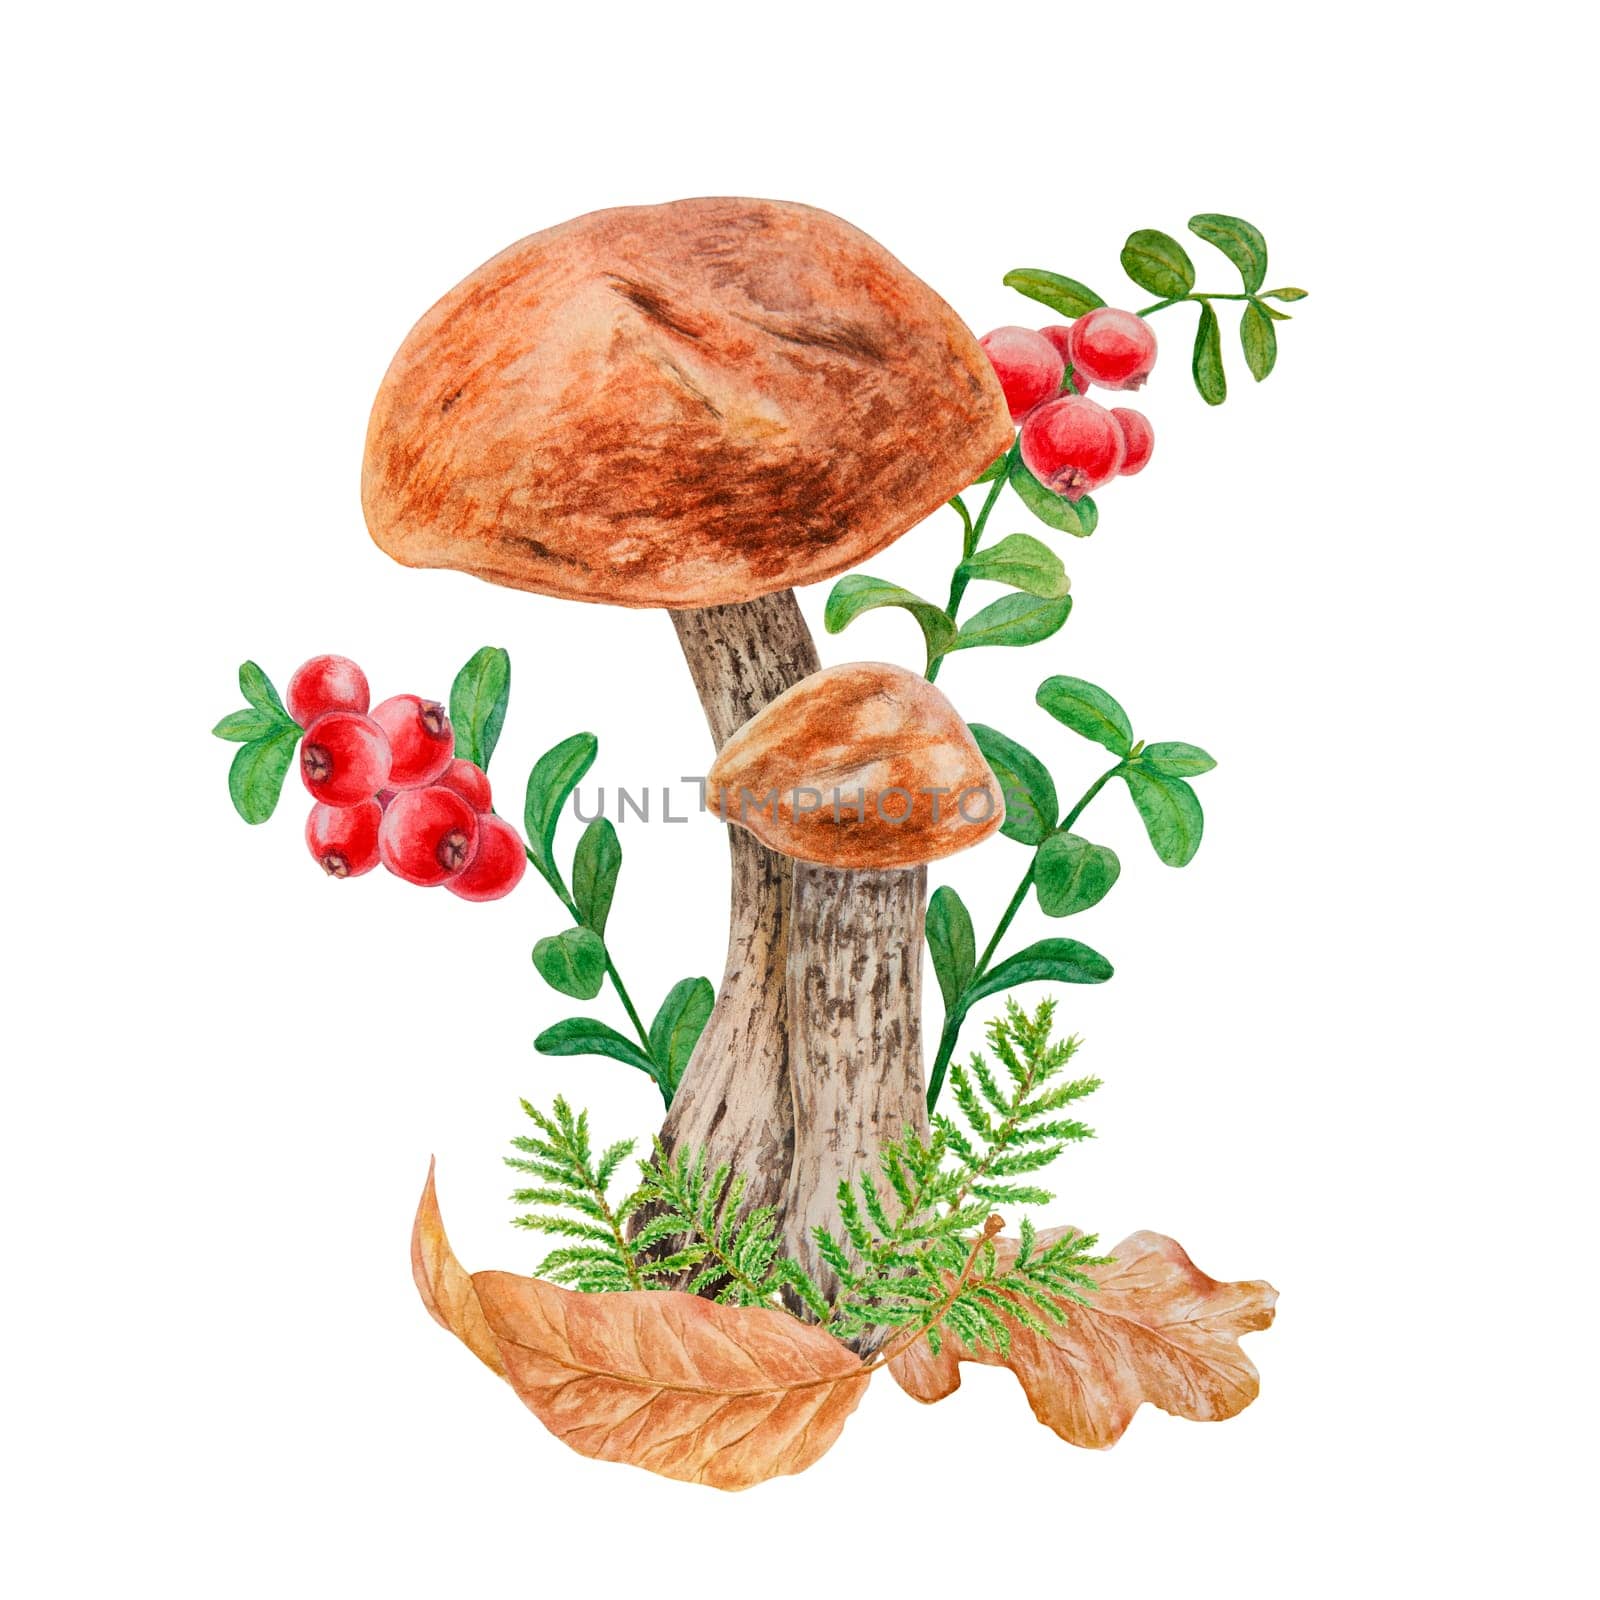 Wild mushroom, dry leaves, red berries, moss watercolor handdrawn botanical realistic illustration. Forest boletus, cranberry branch clip art for printing on fabric, card, invitation, menu, farm print by florainlove_art